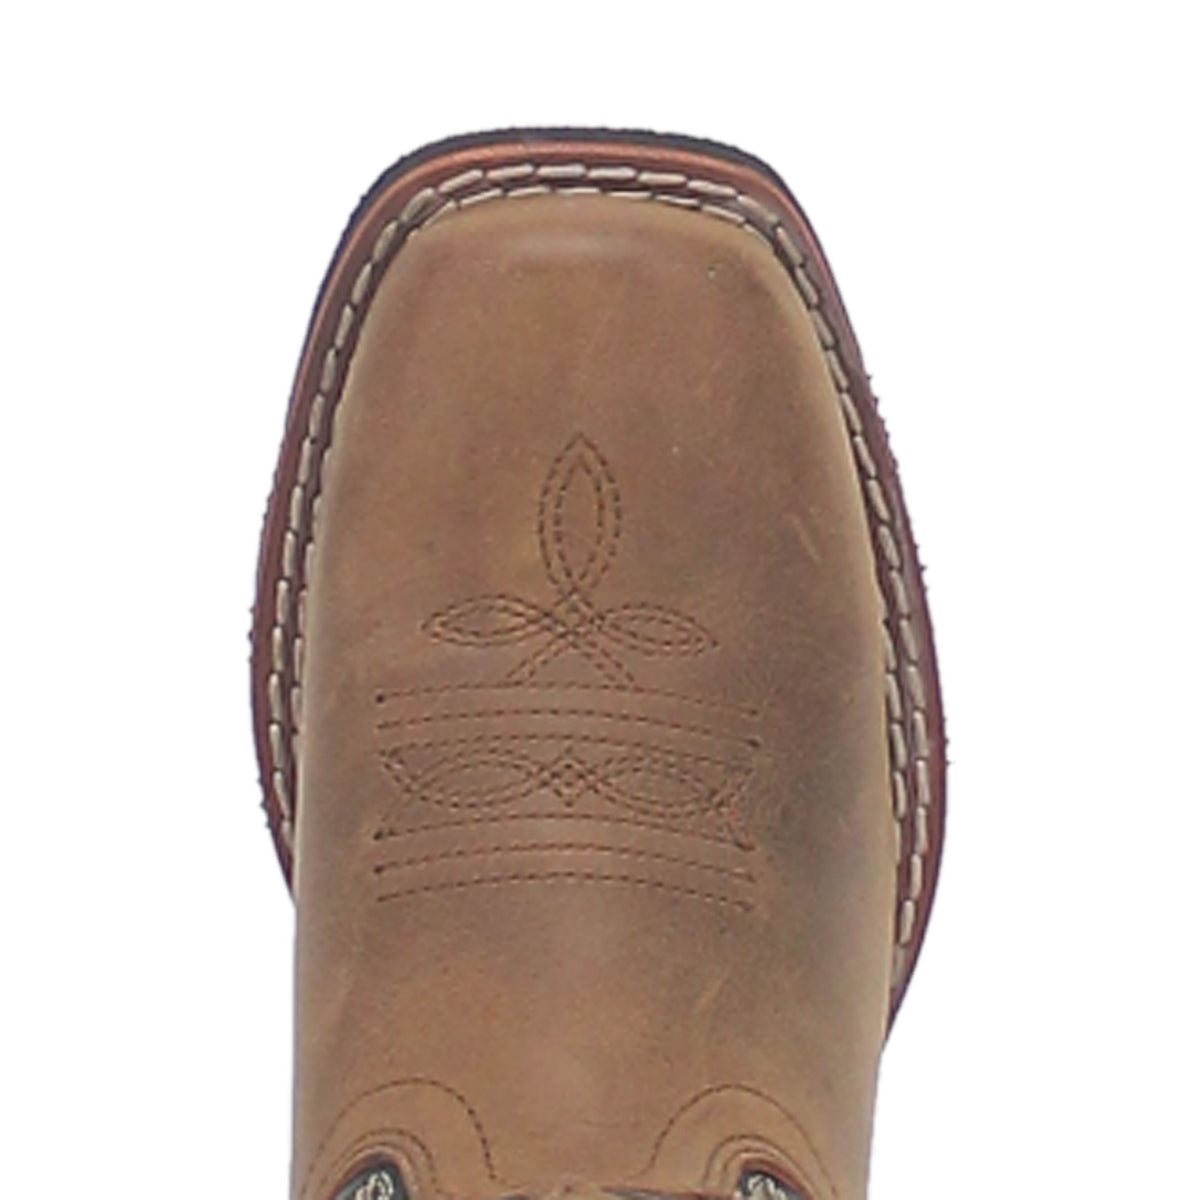 RASCAL LEATHER YOUTH BOOT Cover